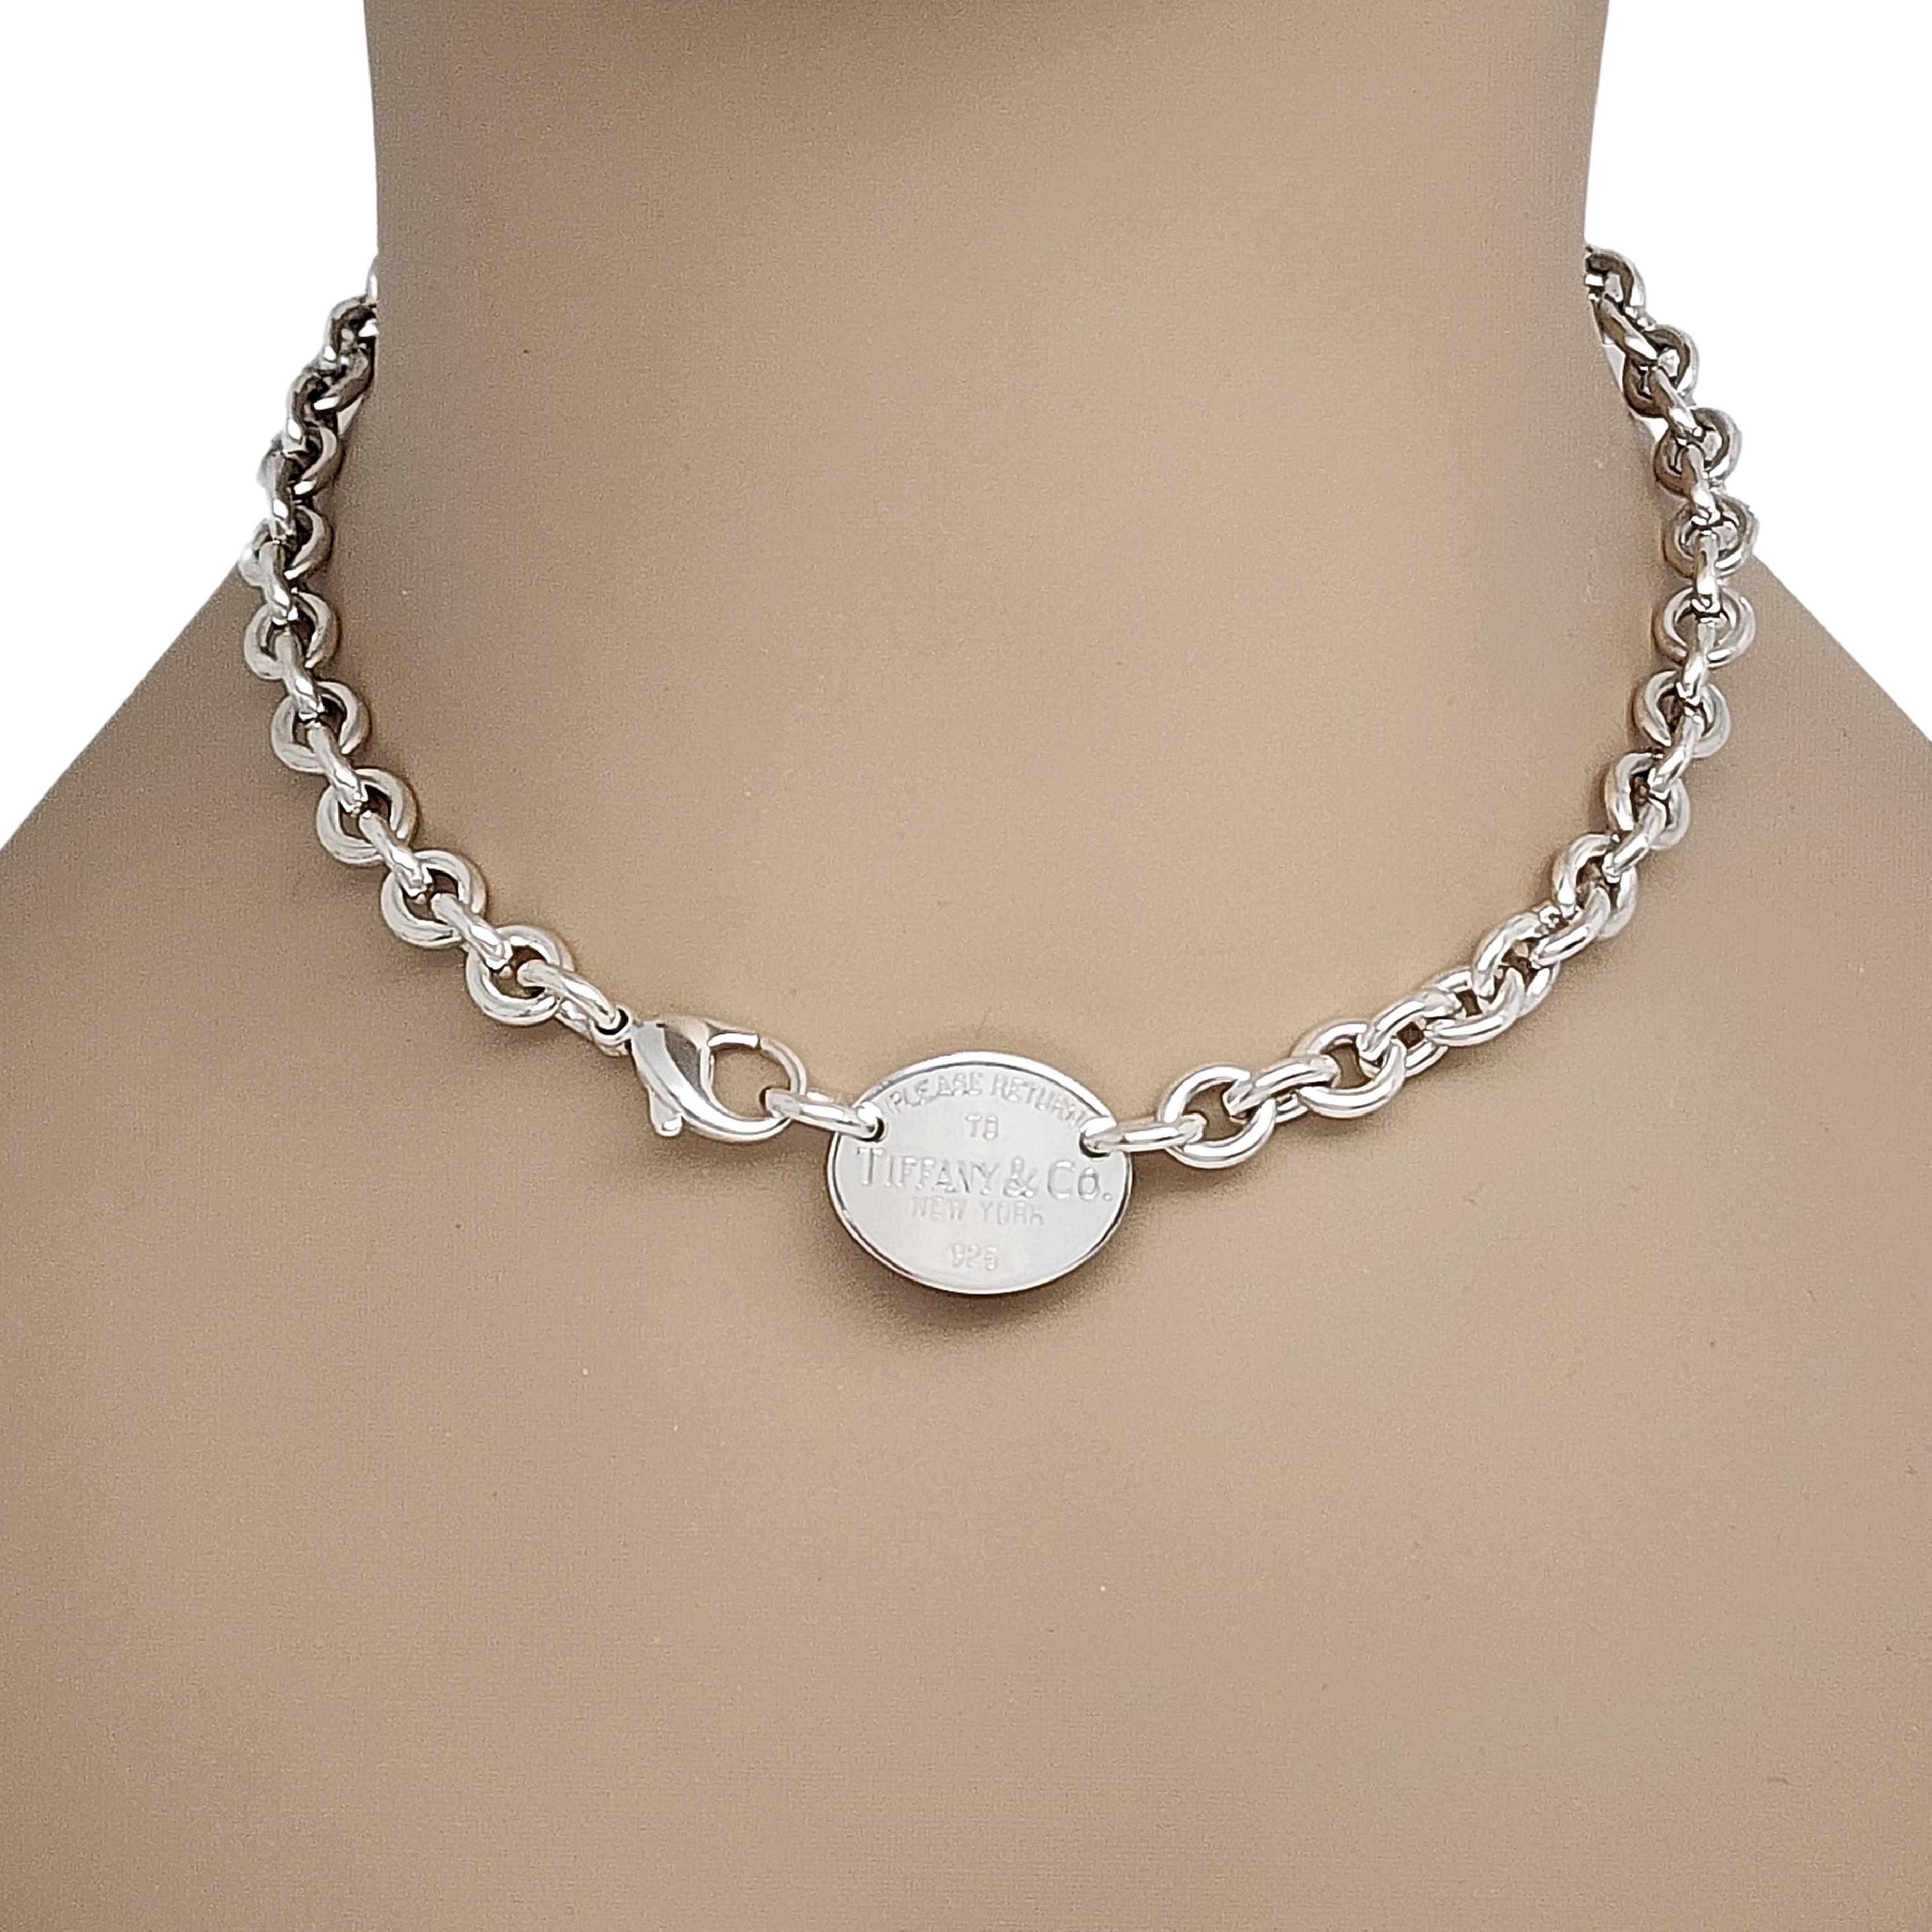 Tiffany & Co sterling silver rolo link choker necklace with Return to Tiffany tag.

Authentic Tiffany necklace featuring rolo links with oval Return to Tiffany tag. Lobster claw closure. Does not include Tiffany & Co box or pouch.

Measures approx